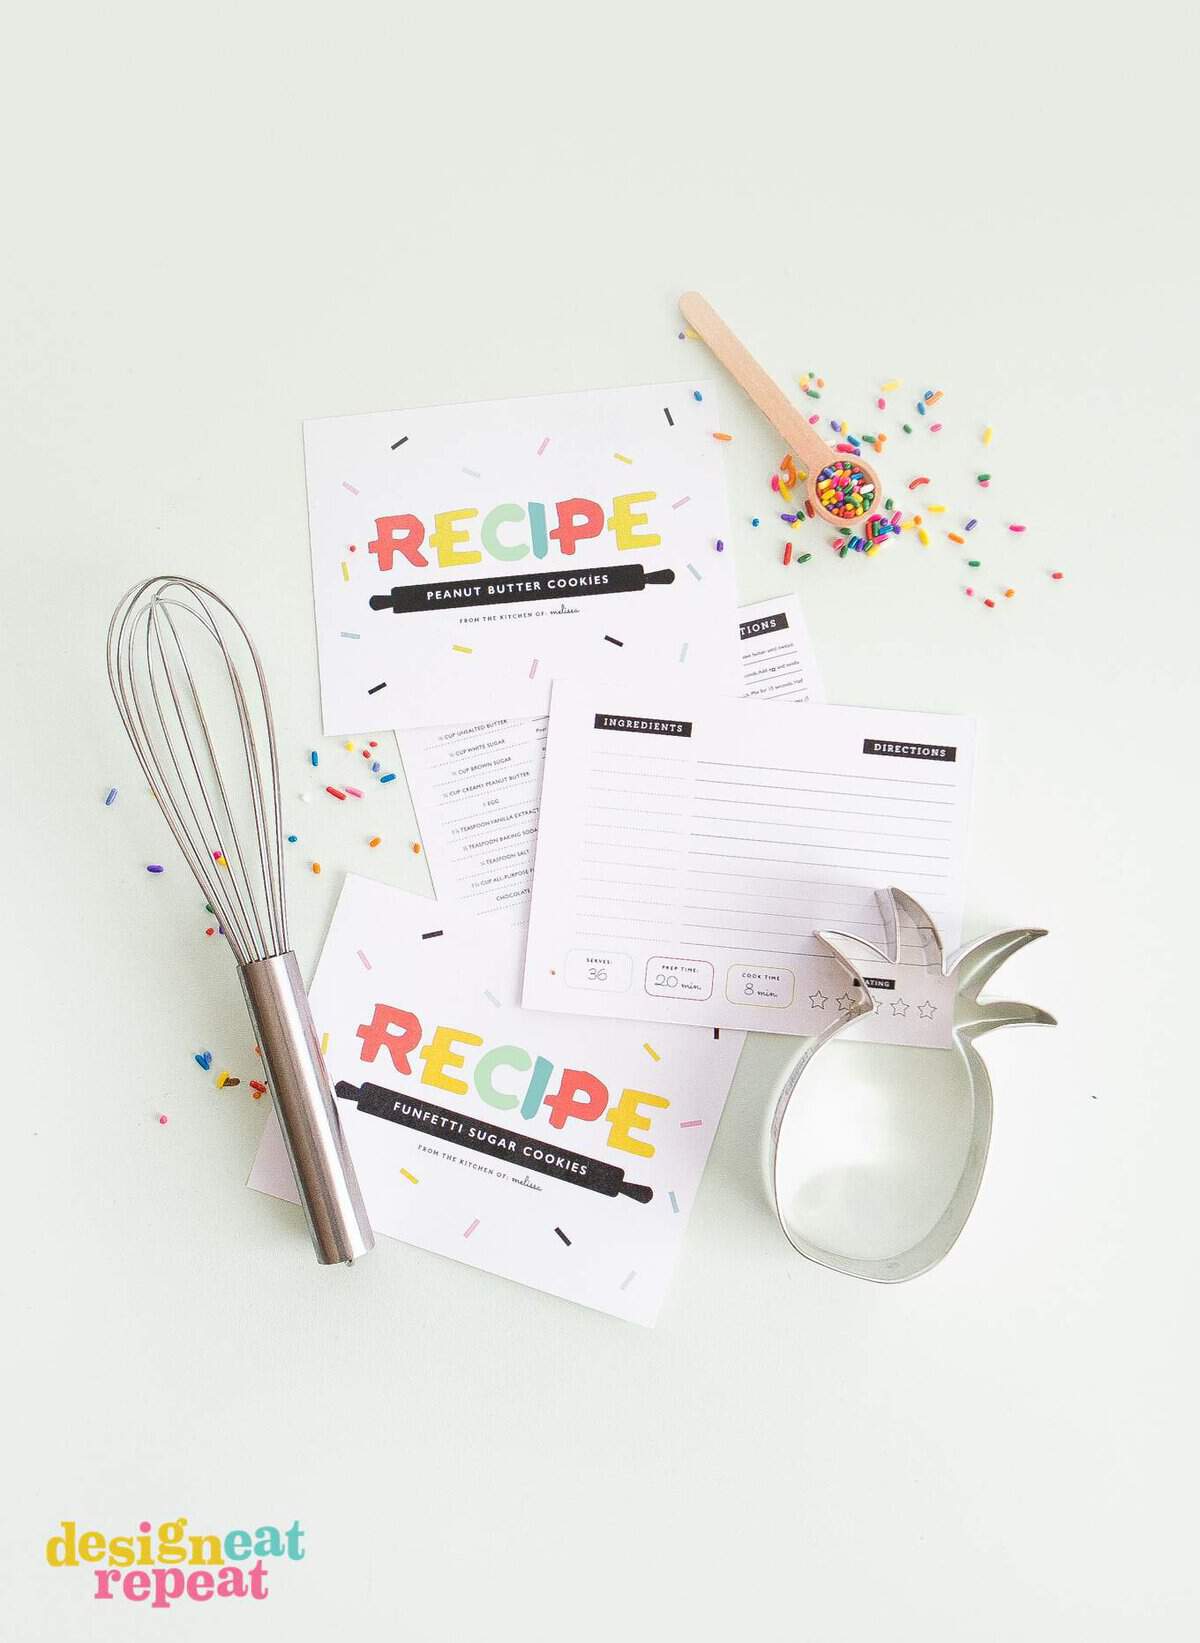 Download these free printable recipe cards & bring back the pre-internet nostalgia of hand writing & exchanging recipes with friends & family!